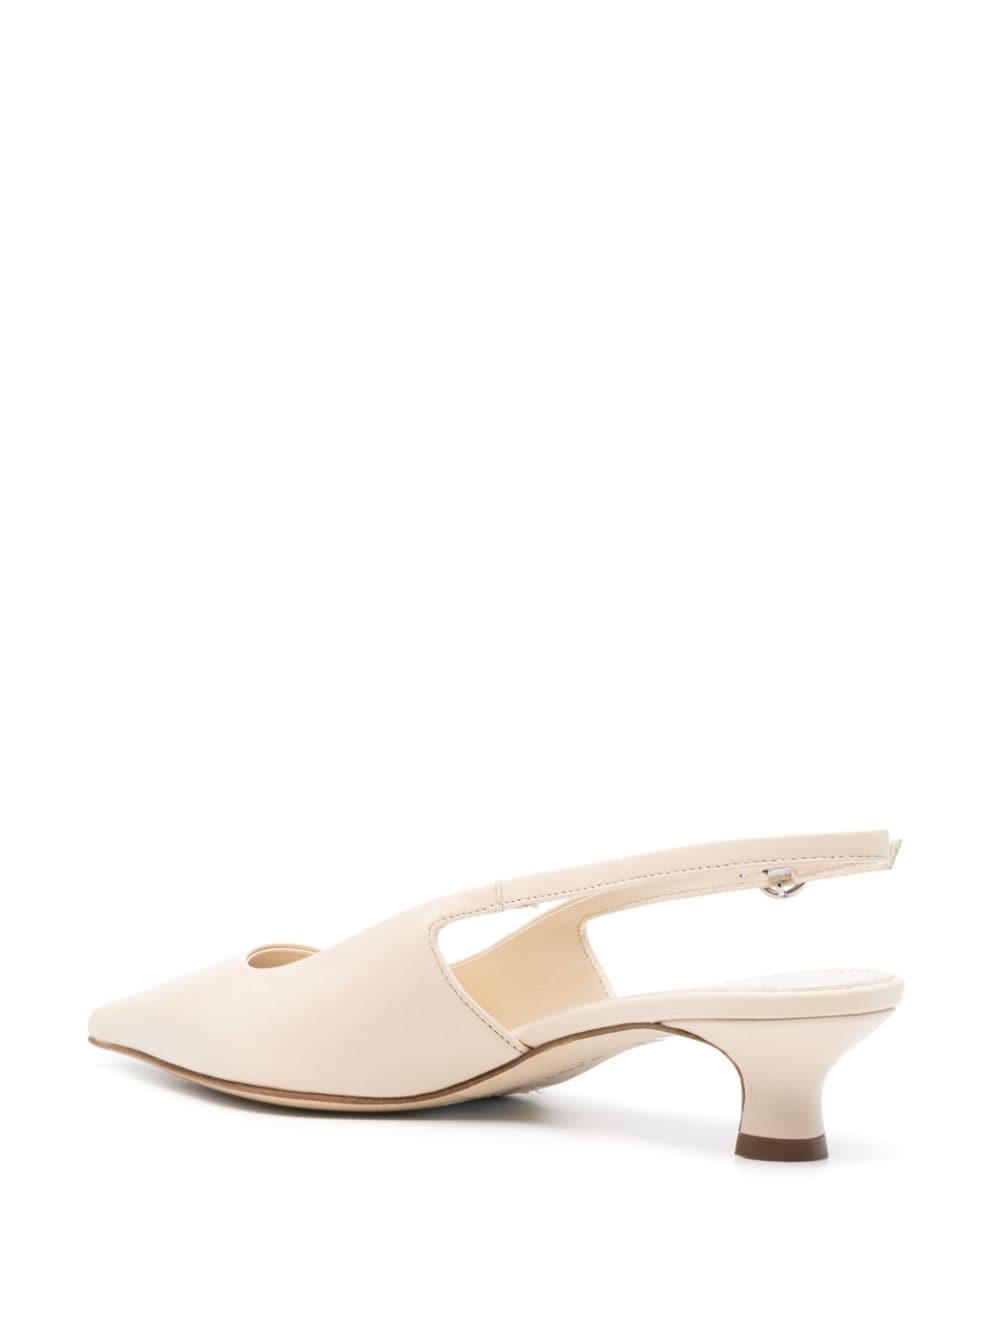 Aeyde Catrina 55mm leather pumps - Beige